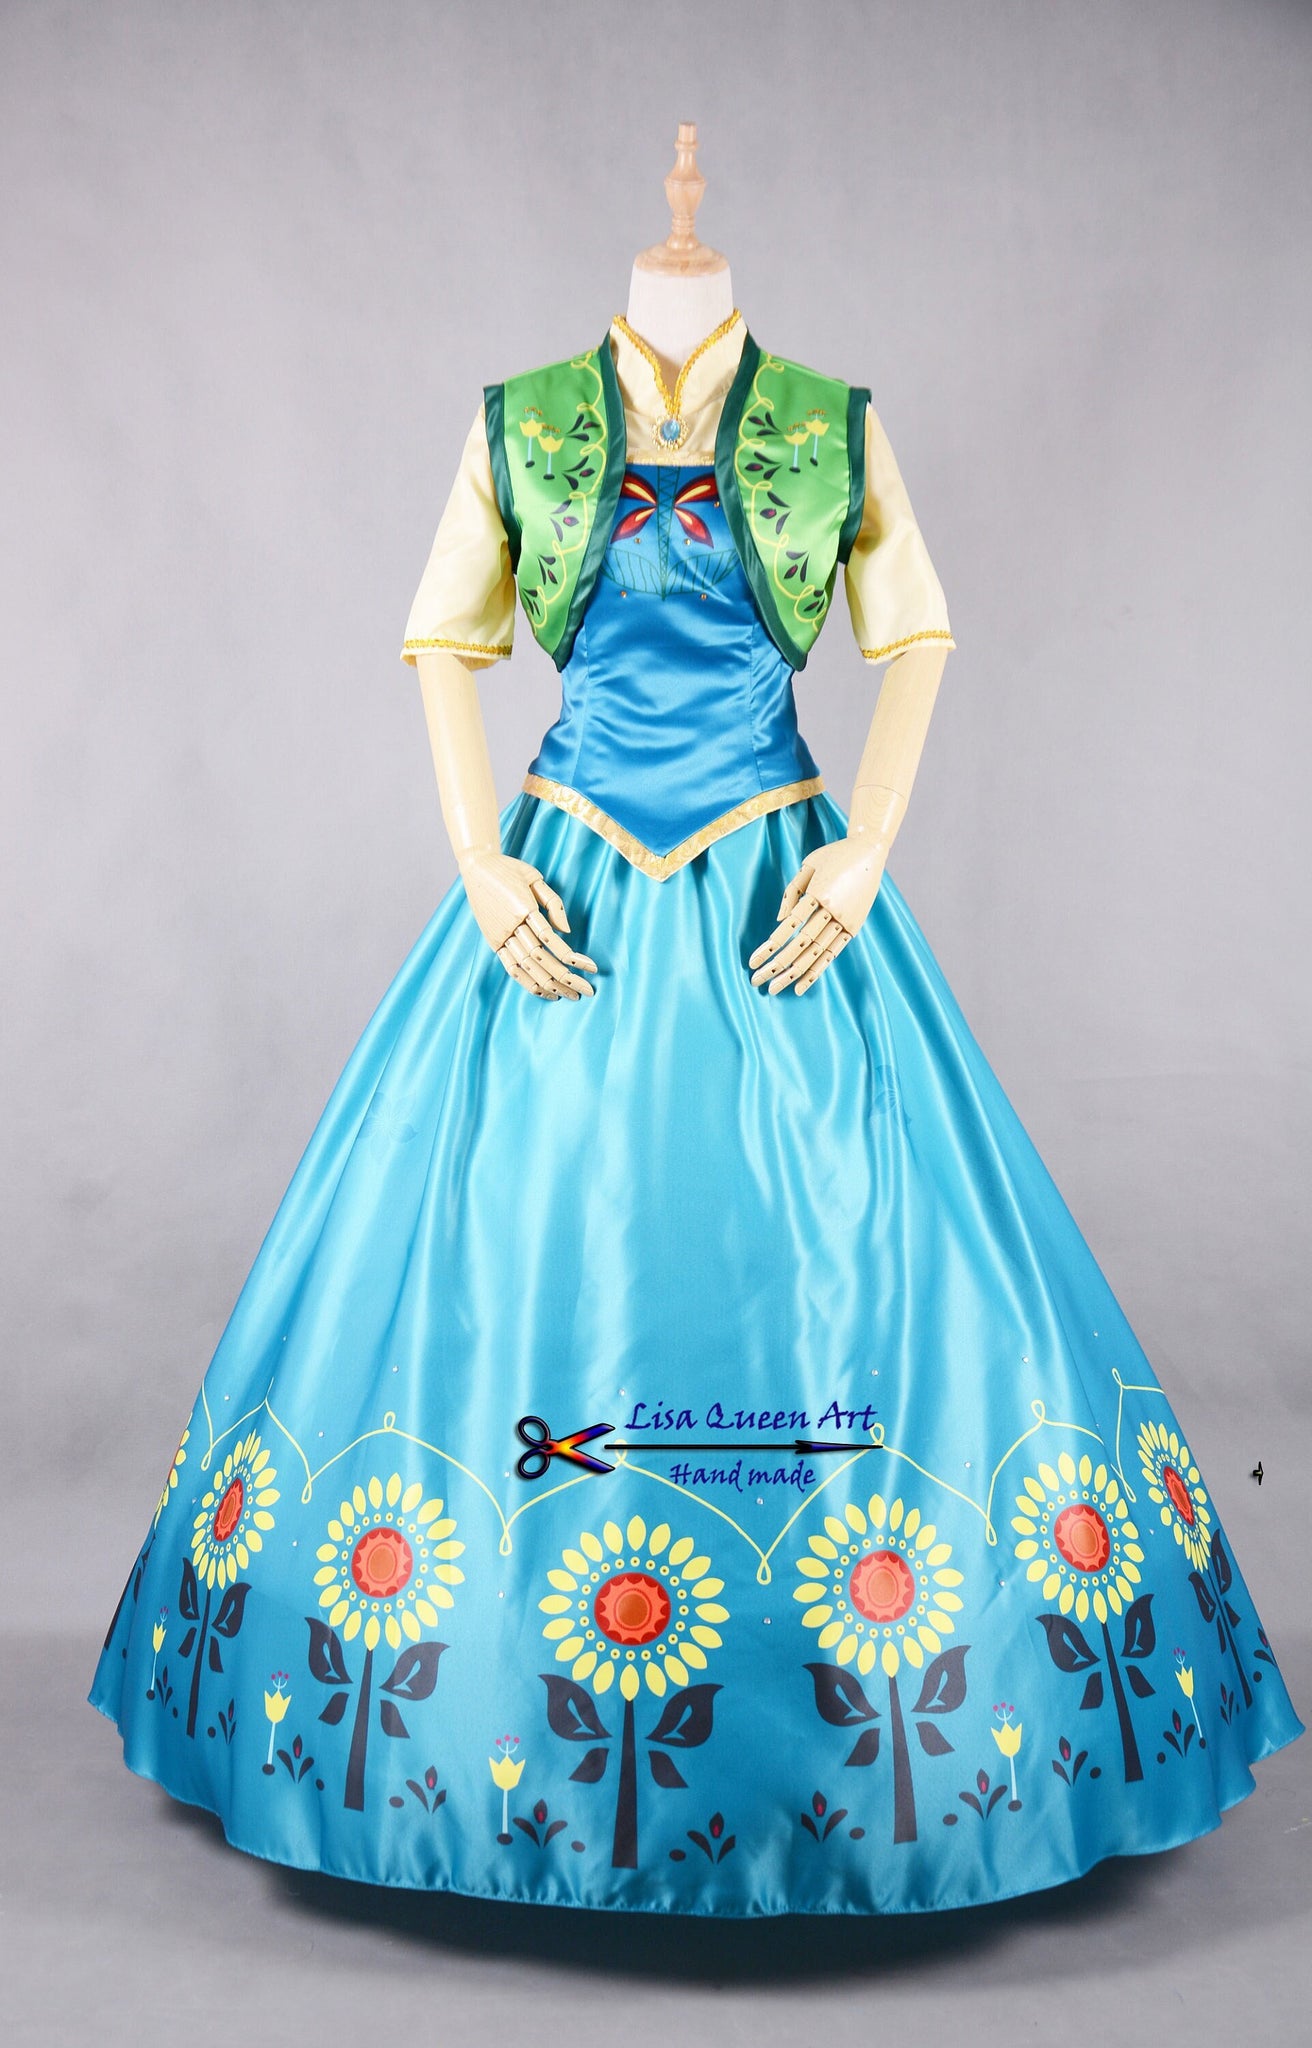 Princess Anna Printed Sunflower Suits Frozen 2 Anna Queen Cosplay Costume